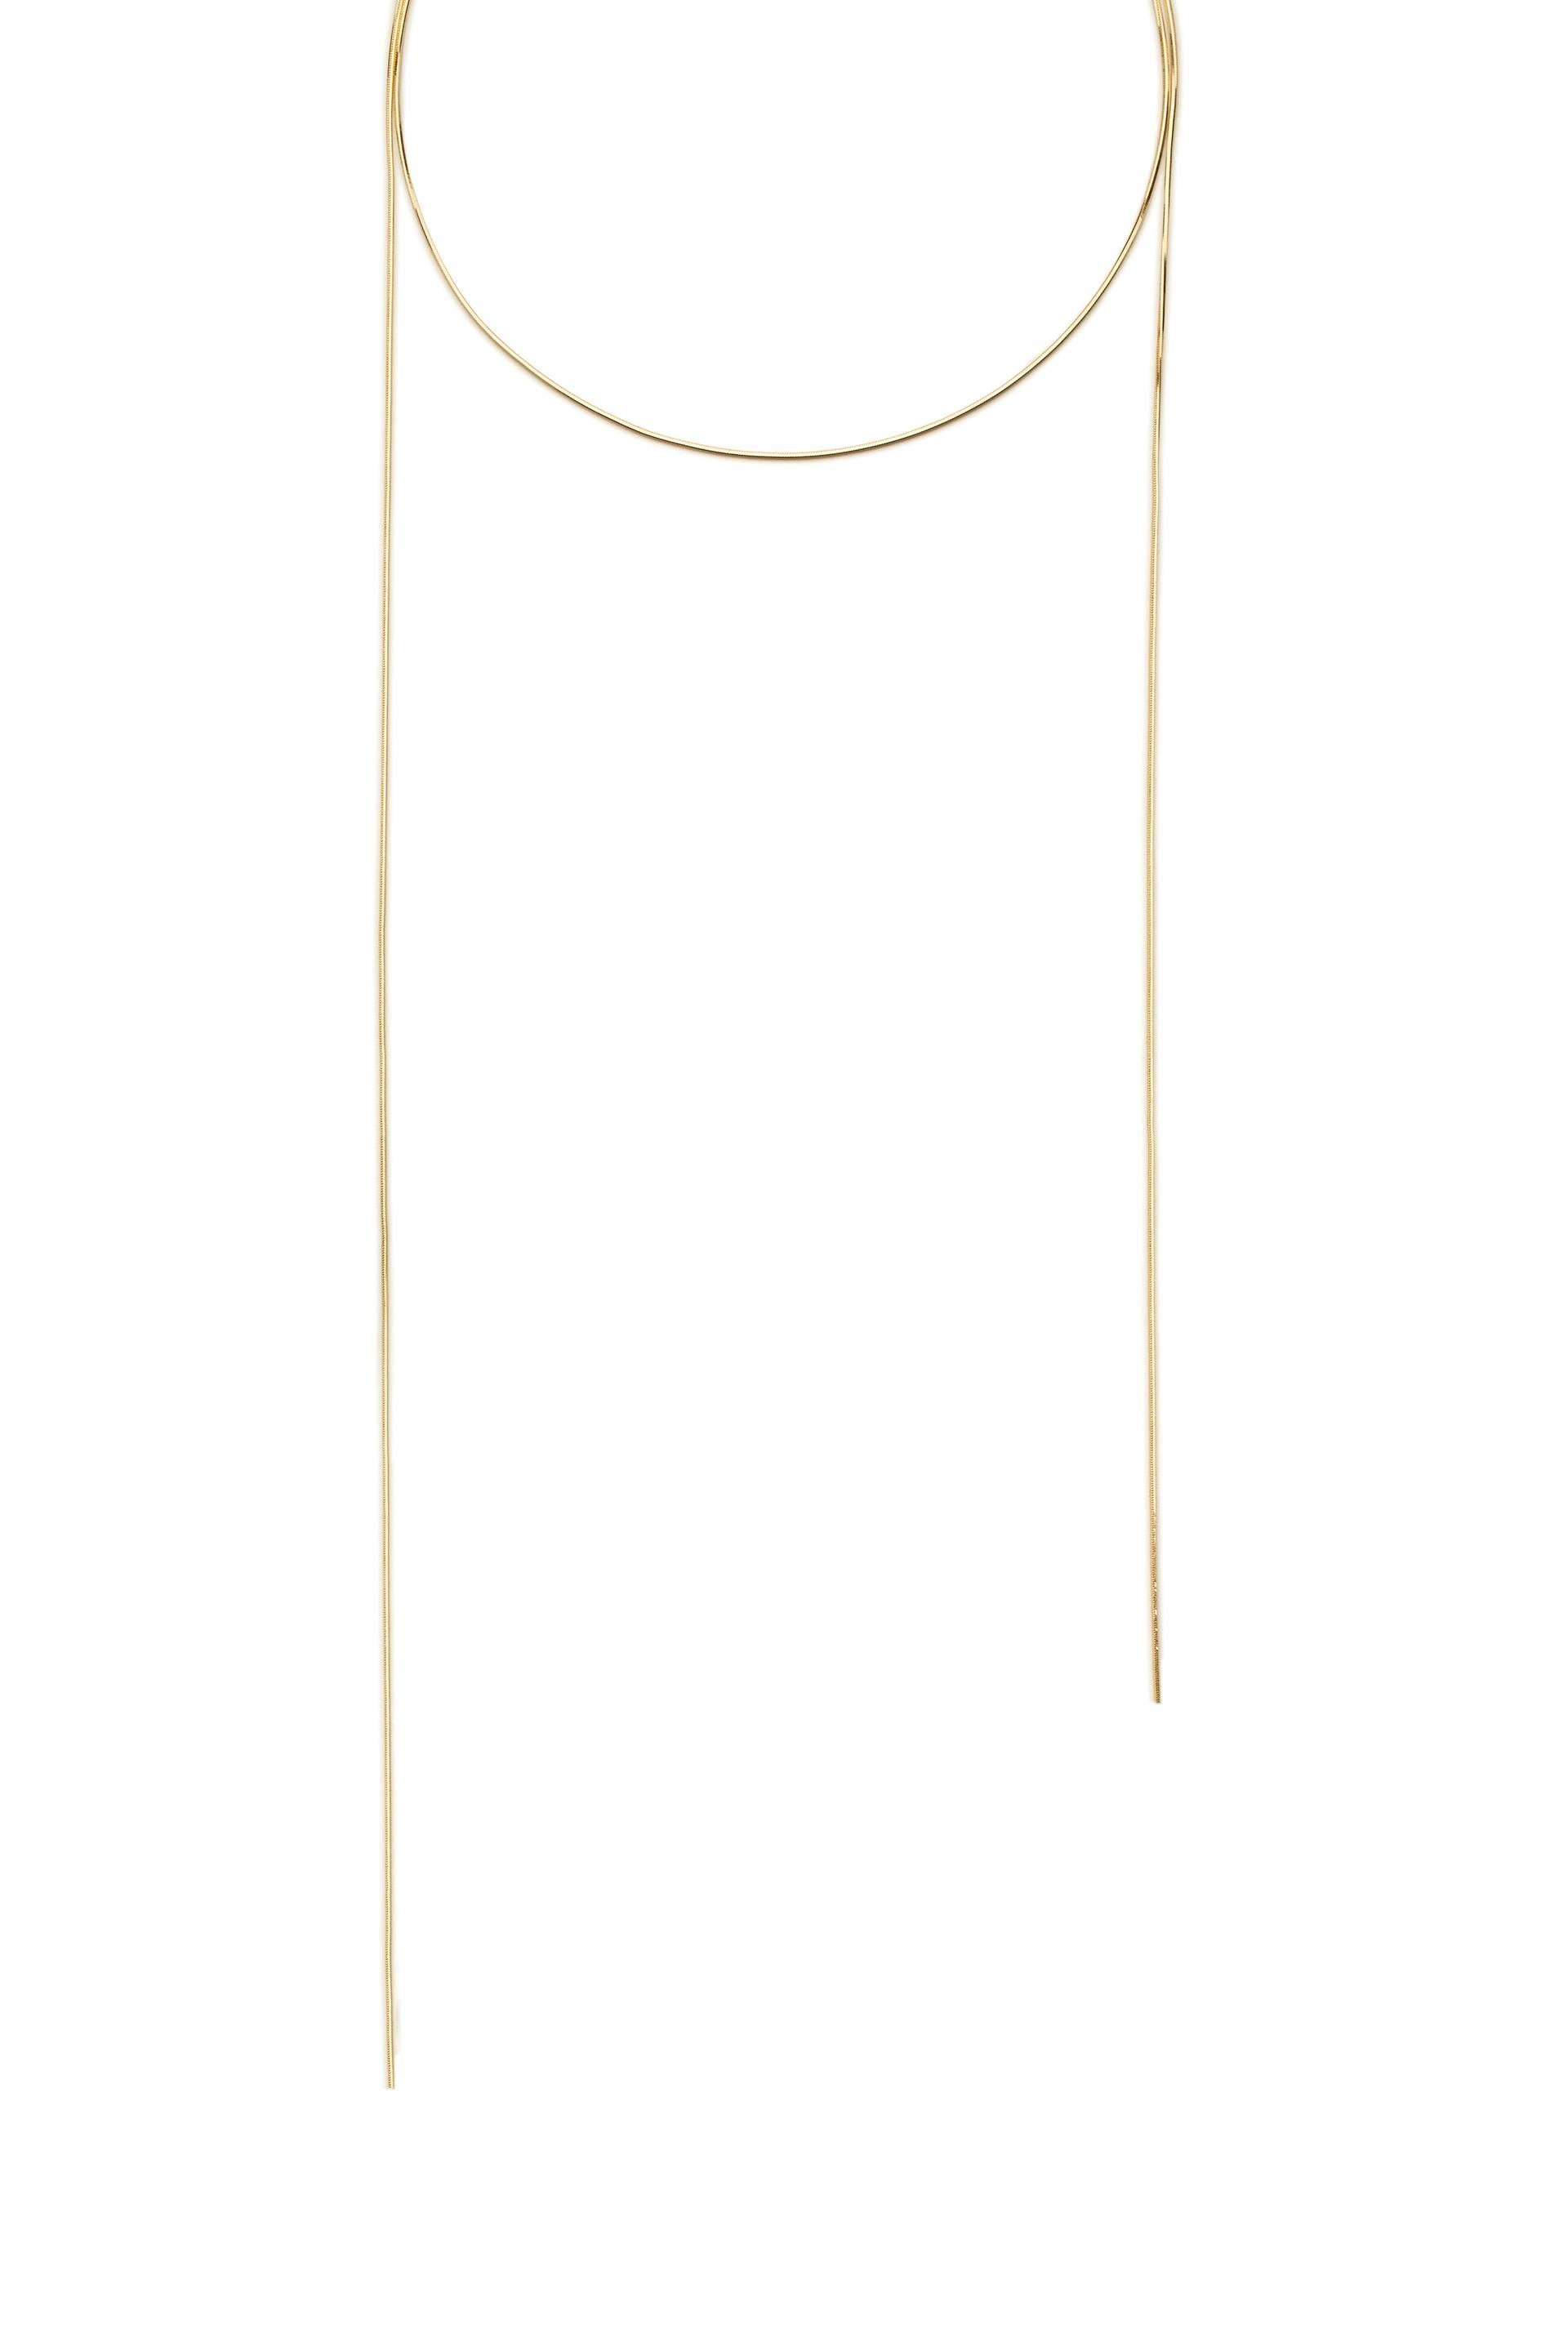 Loaded with its minimalistic elegance, this necklace from Iosselliani is strung with two sided  threads to refresh your dalily look with understated glamour. Crafted in Italy with a custom made 18 karat yellow gold, the necklace features a spring